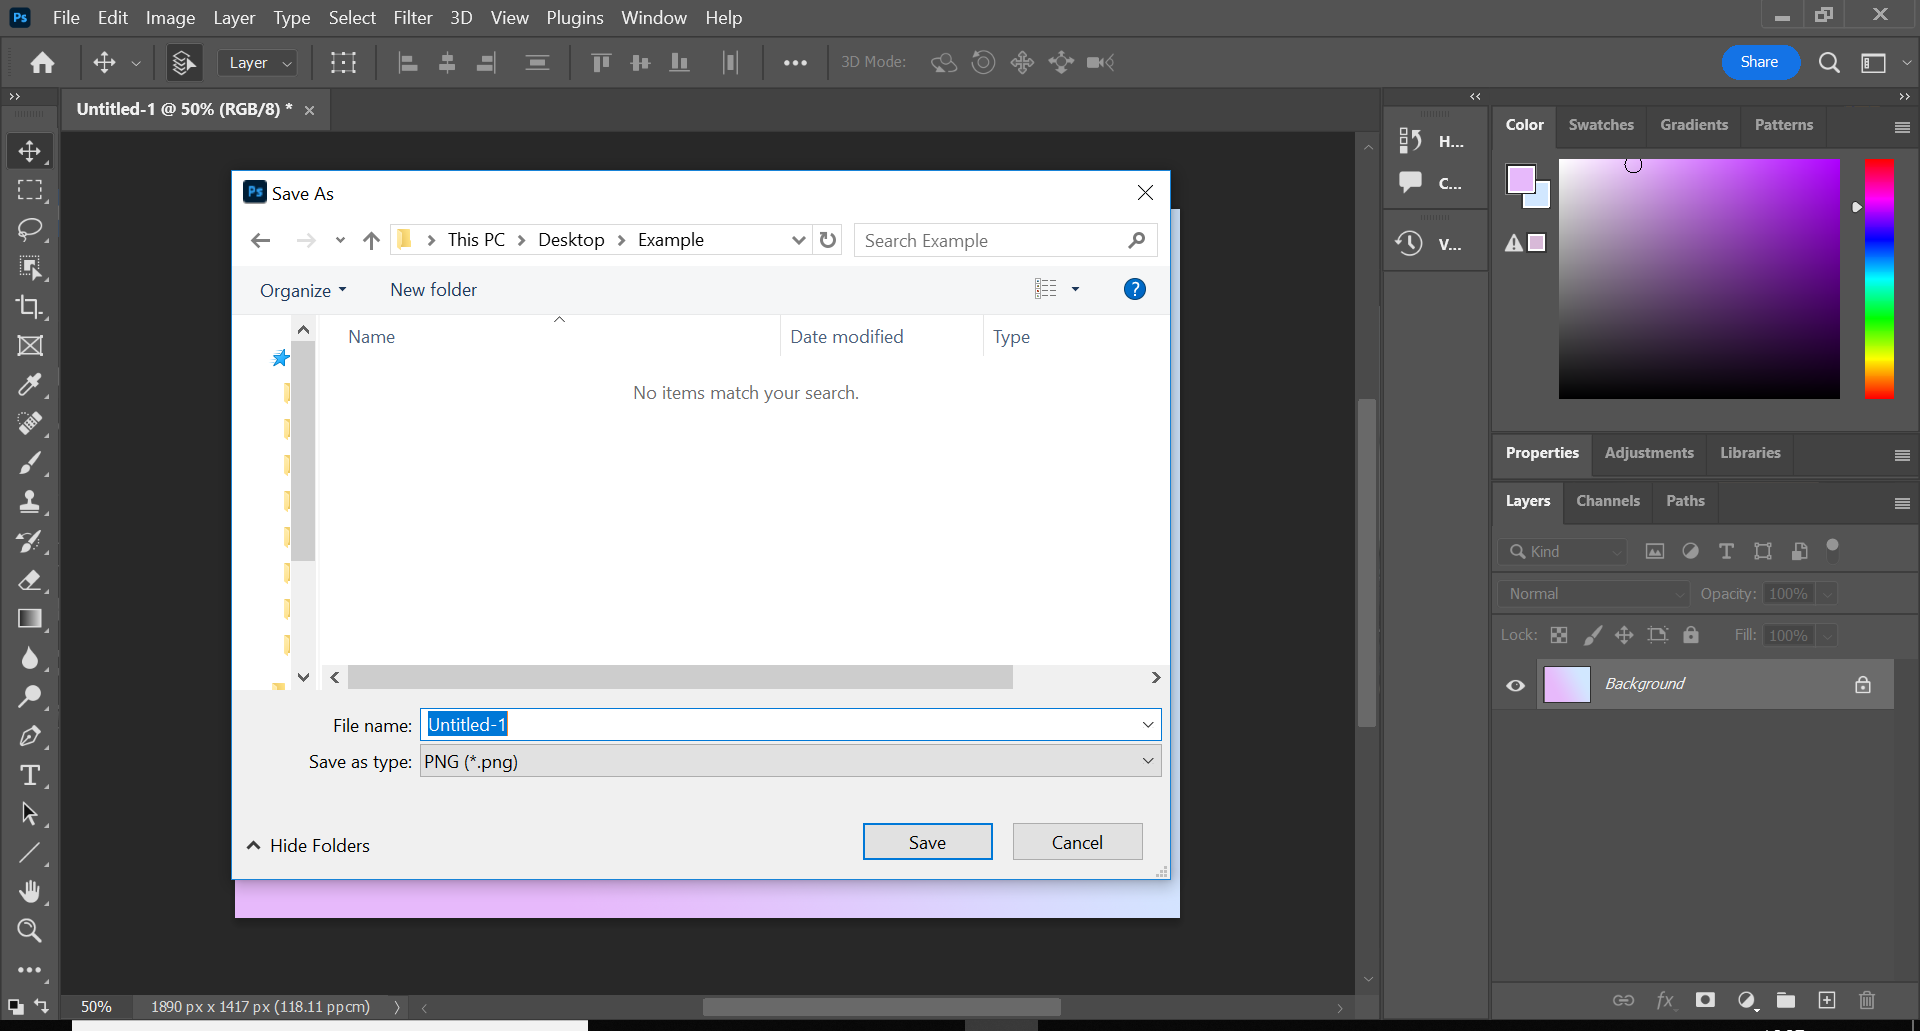 How to export a file as a PNG in Photoshop